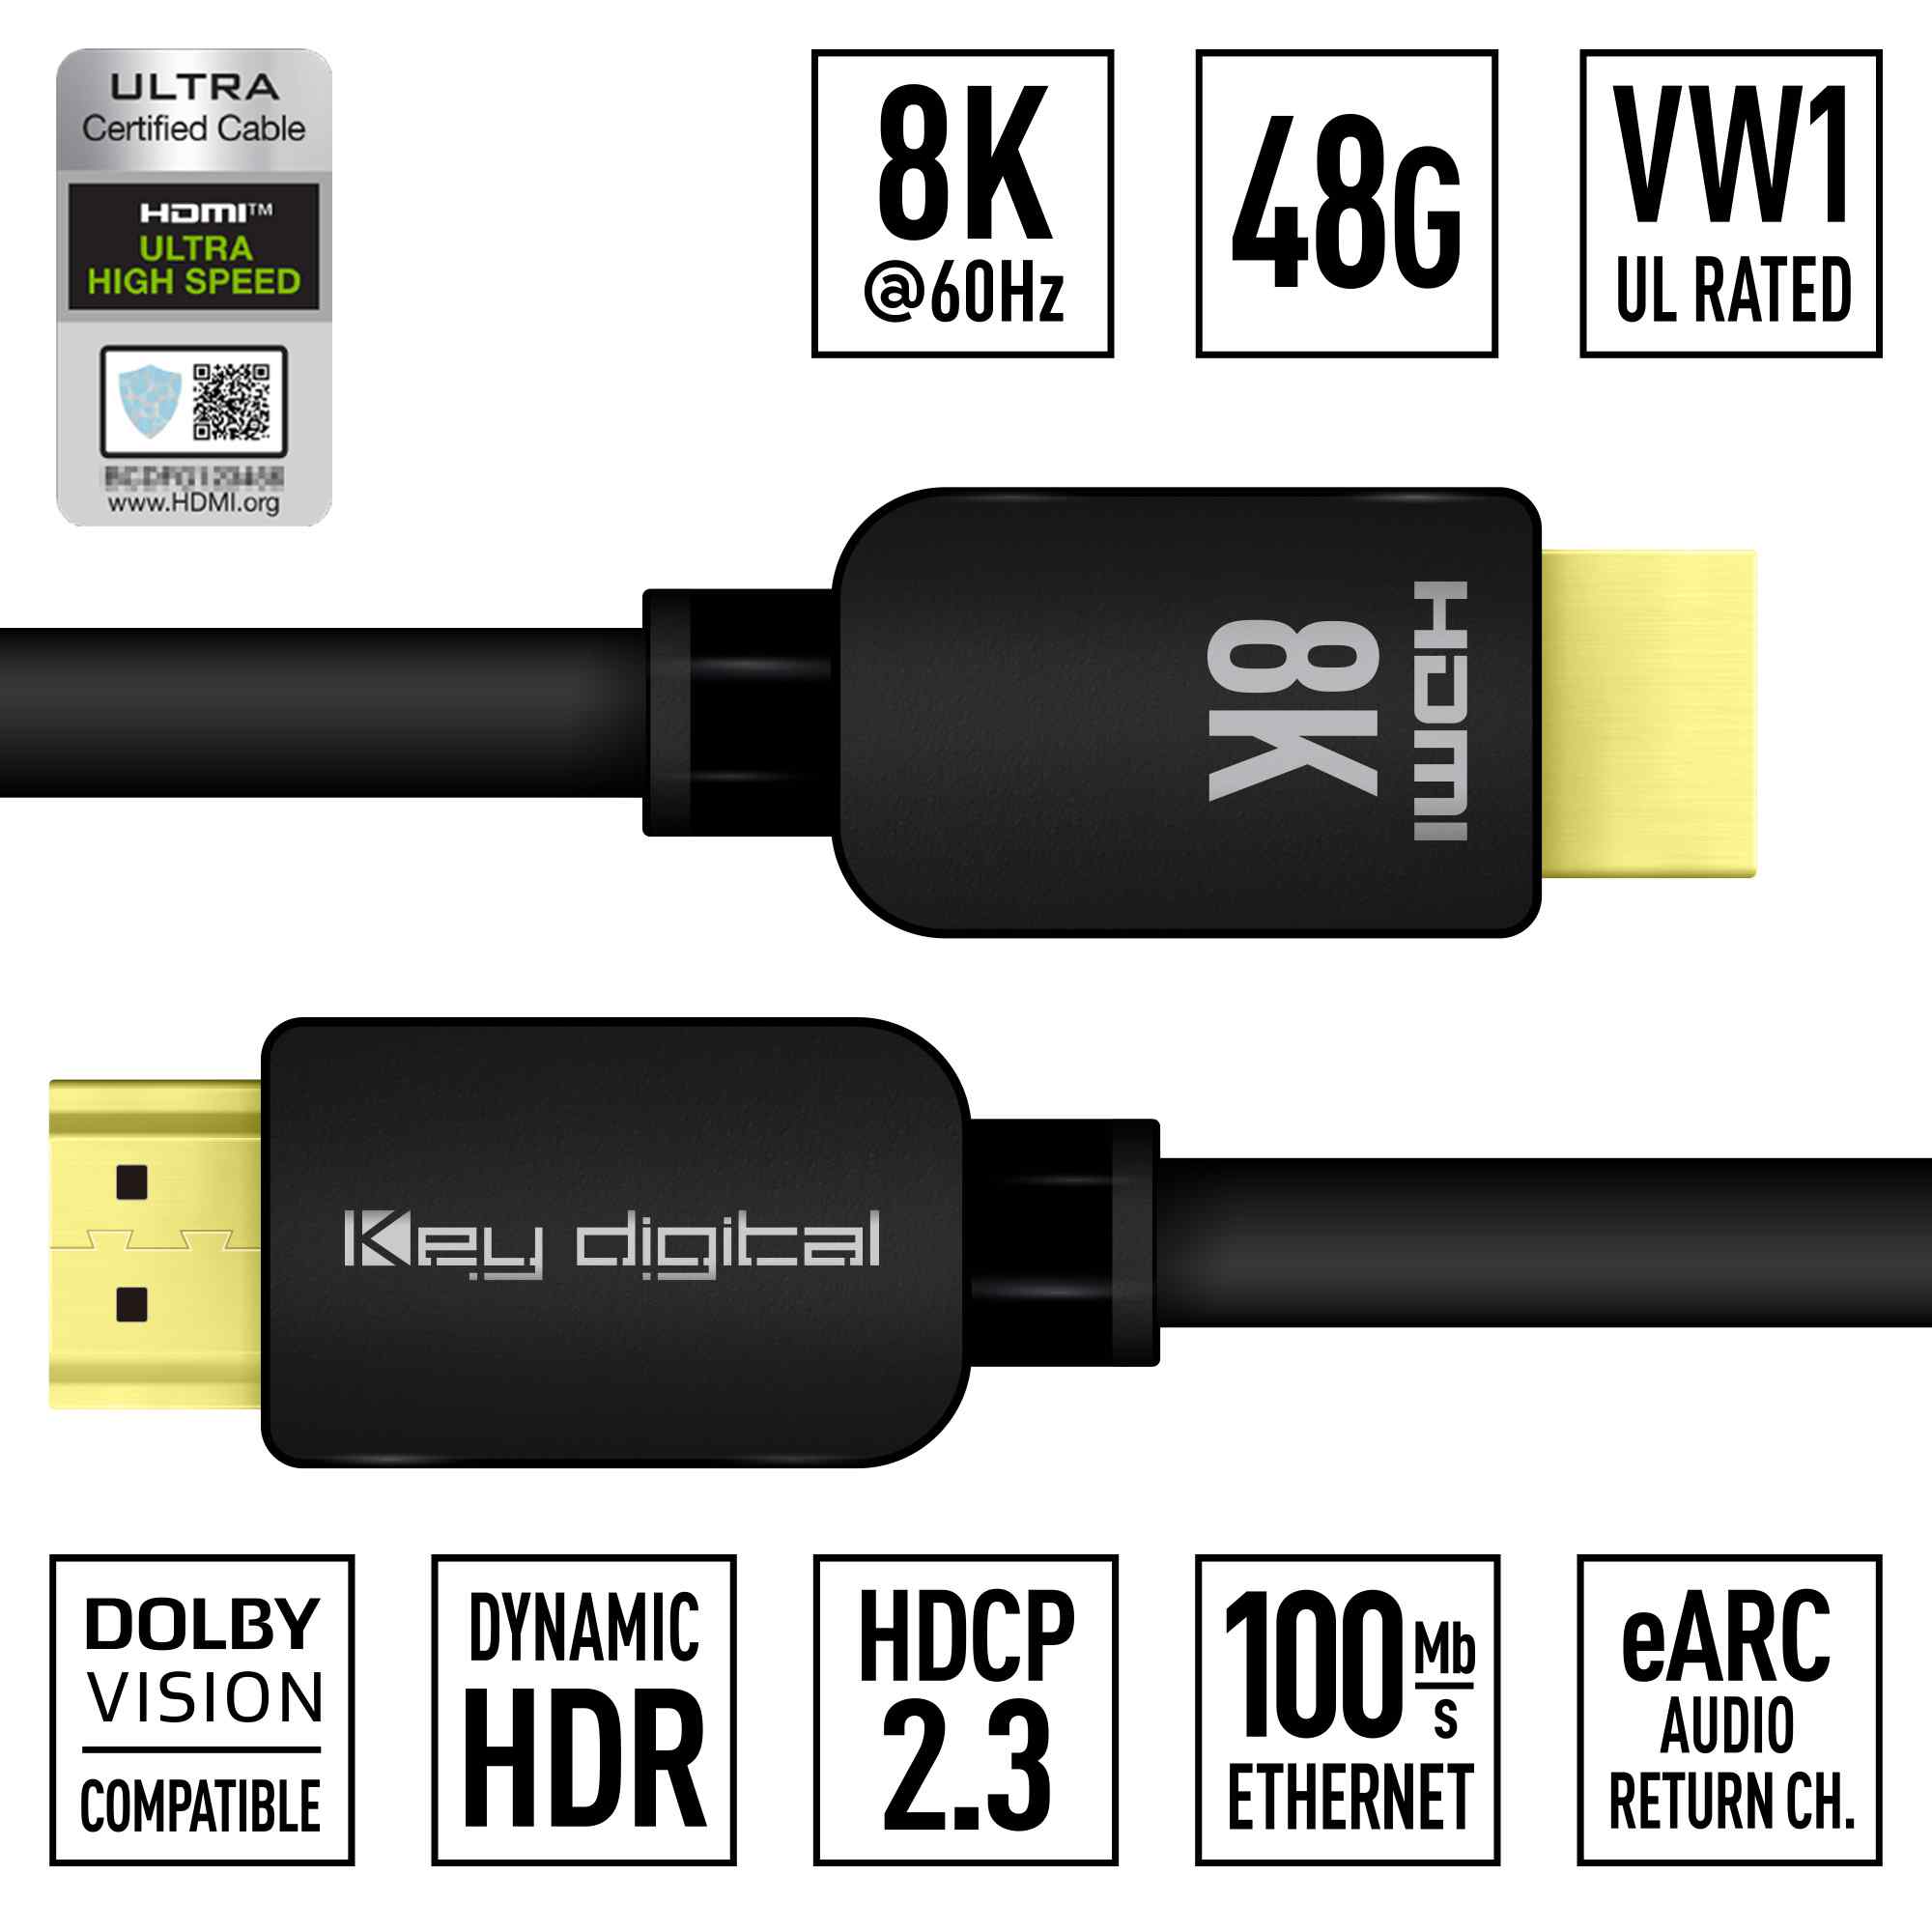 Thumbnail of Key Digital HDMI ultra high speed cable front and rear